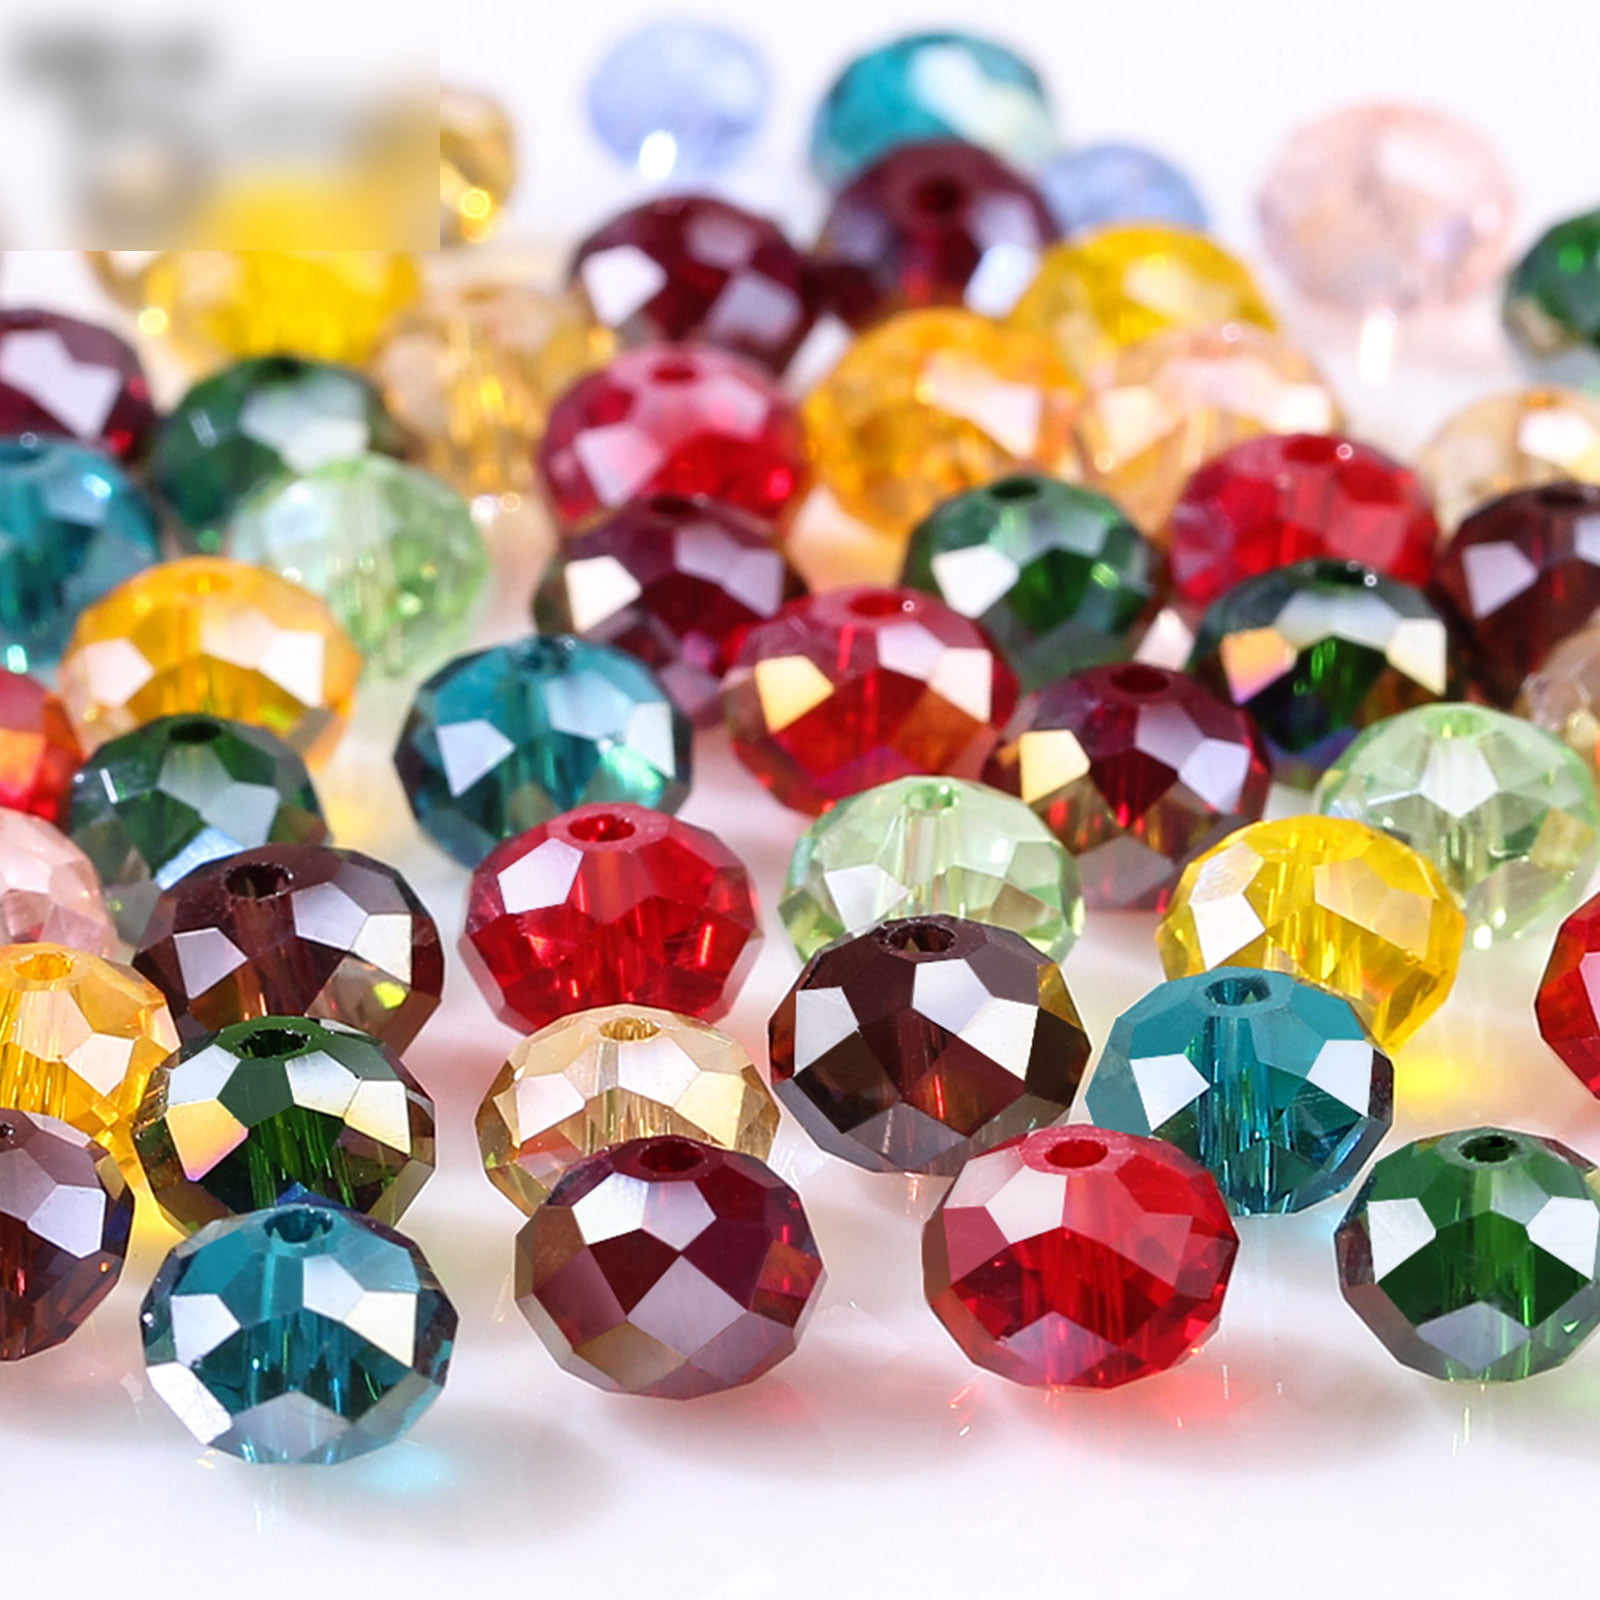 100pcs 8mm Rondelle Beads Faceted Glass Crystal Loose Spacer Bead Jewelry Making 